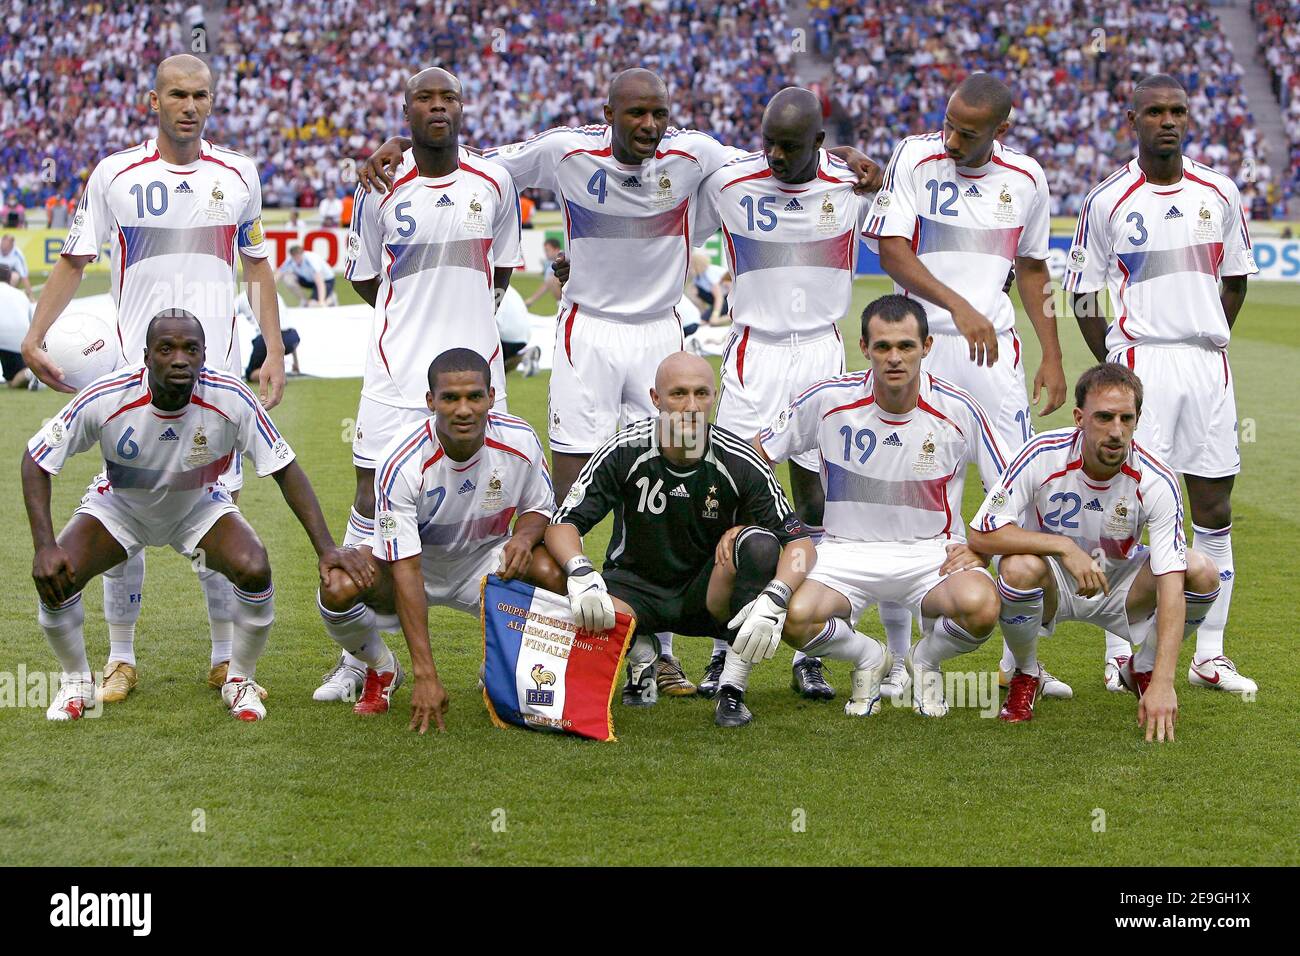 France's soccer team during the World Cup 2006, Final, Italy vs France at  the Olympiastadion stadium in Berlin, Germany on July 9, 2006. The game  ended in a draw 1-1. Italy won